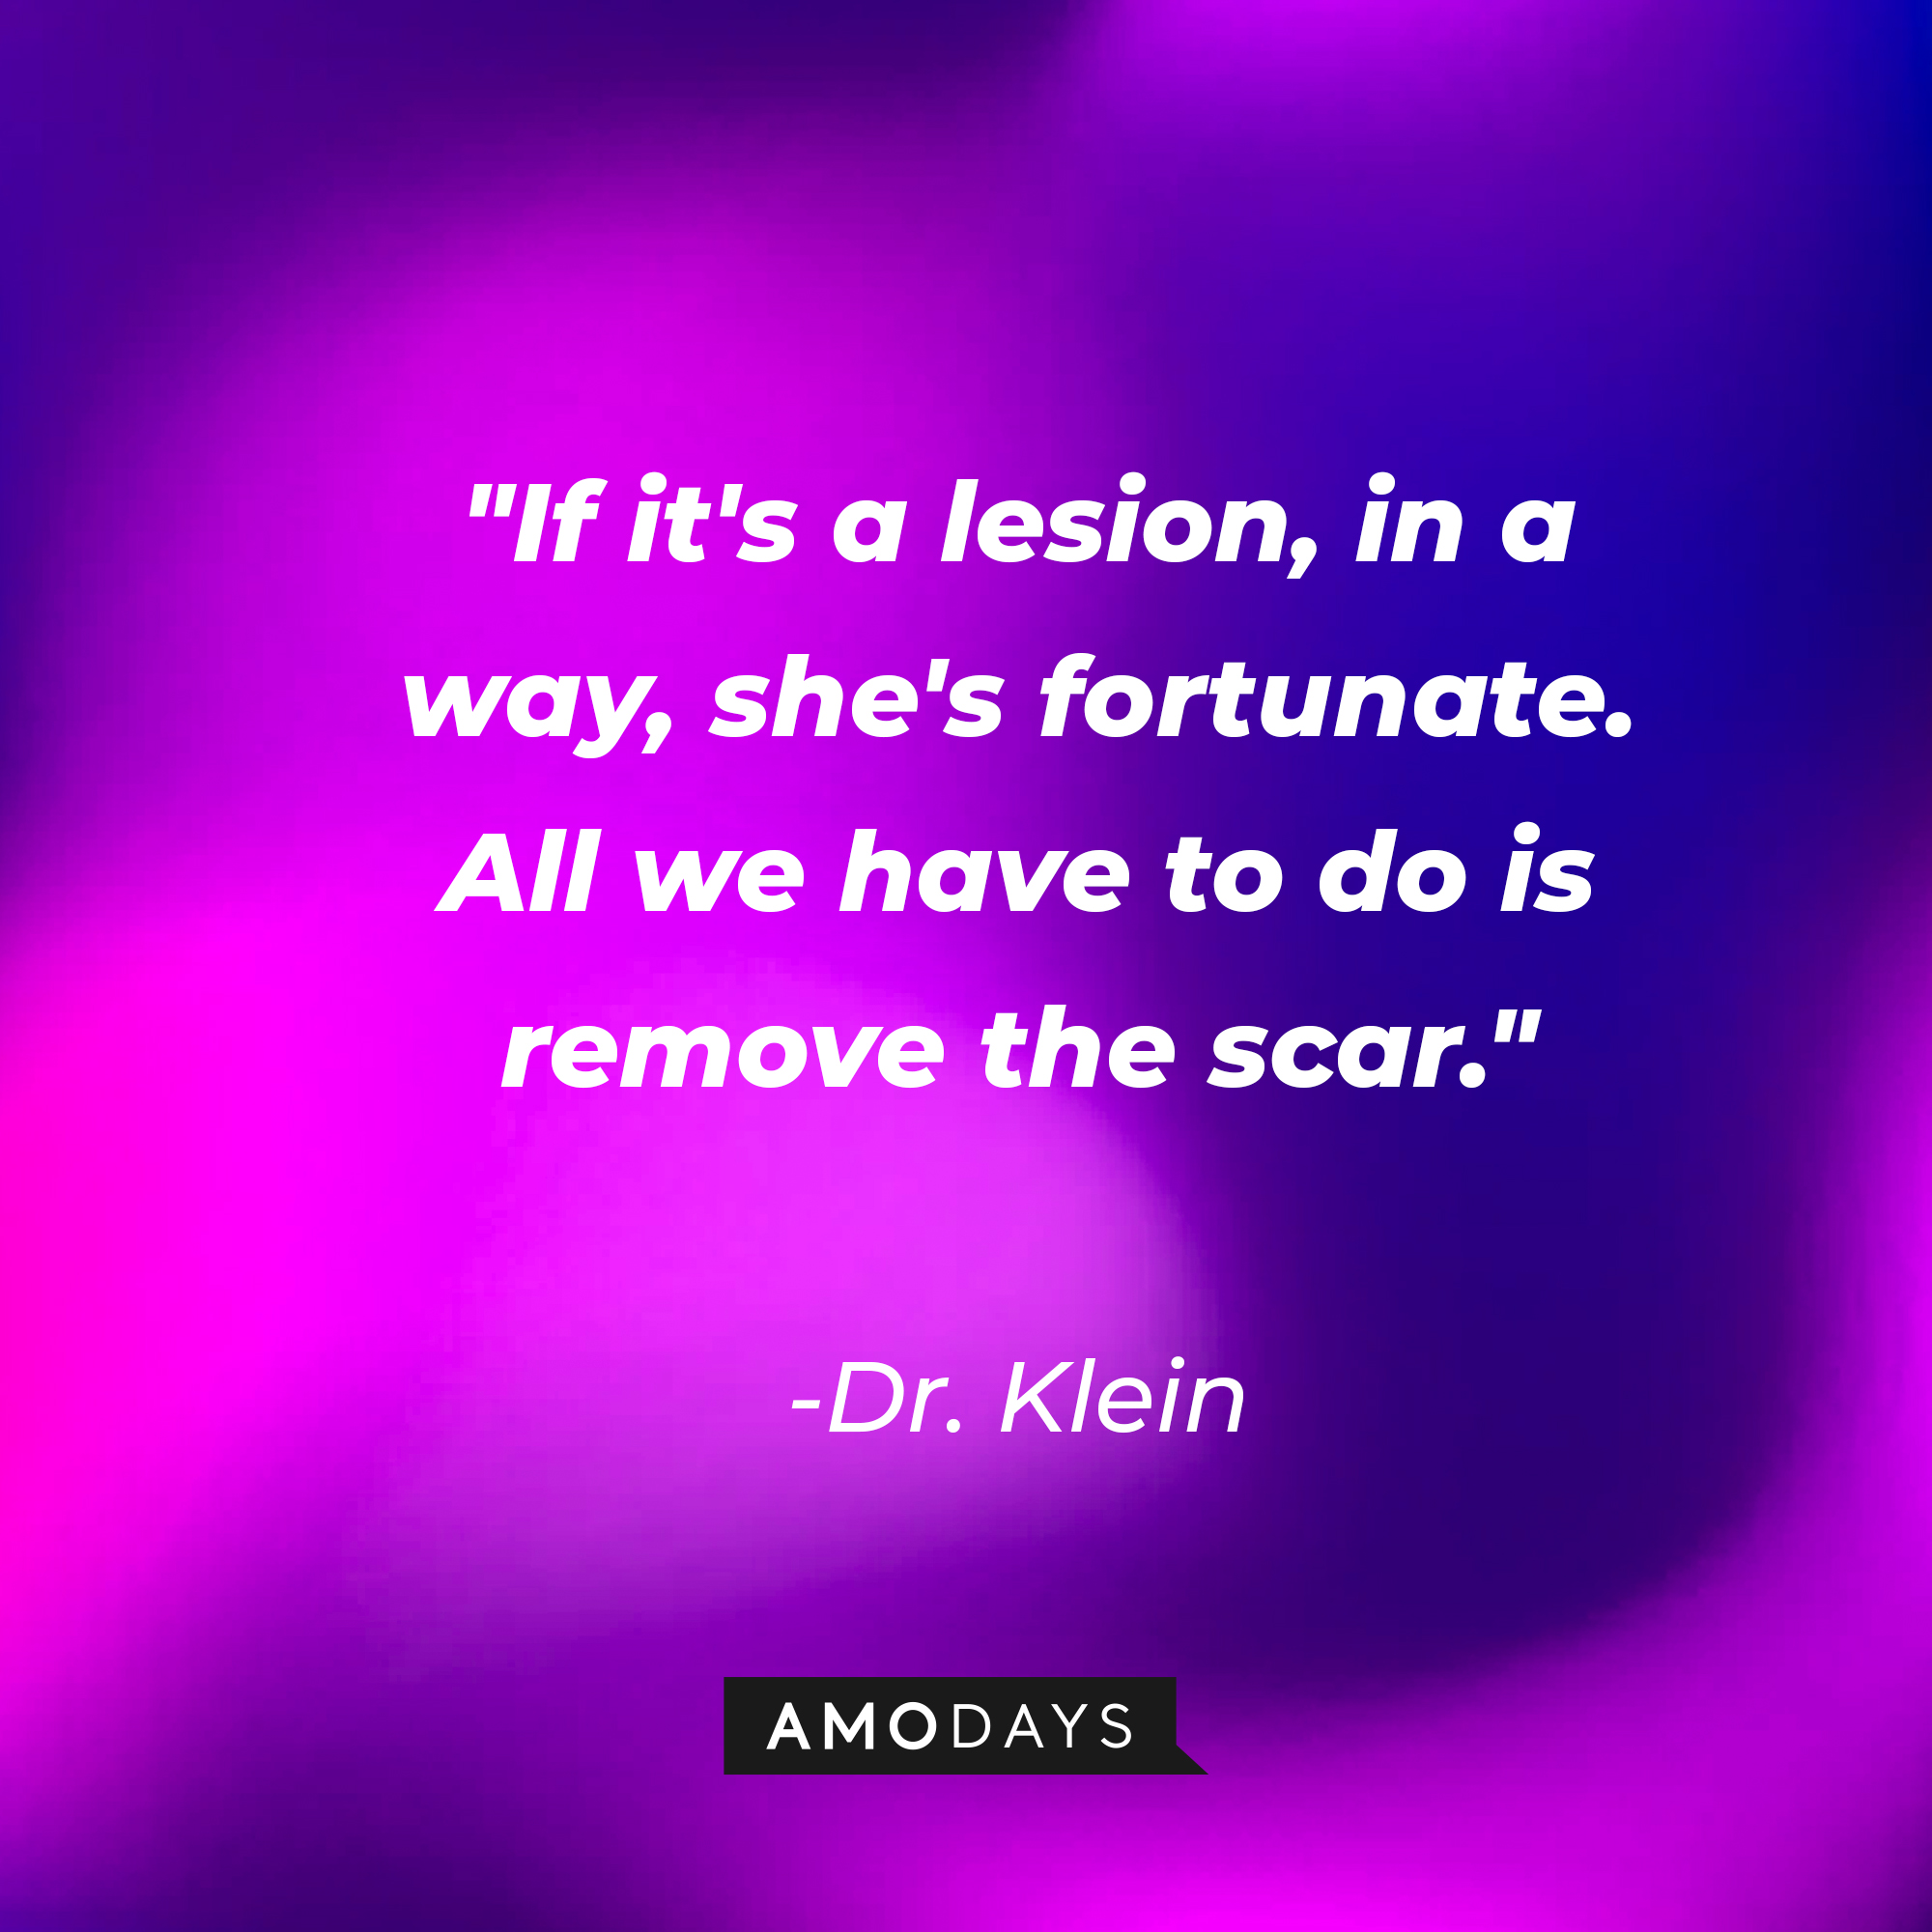 Dr. Klein's quote: "If it's a lesion, in a way, she's fortunate. All we have to do is remove the scar." | Source: AmoDays